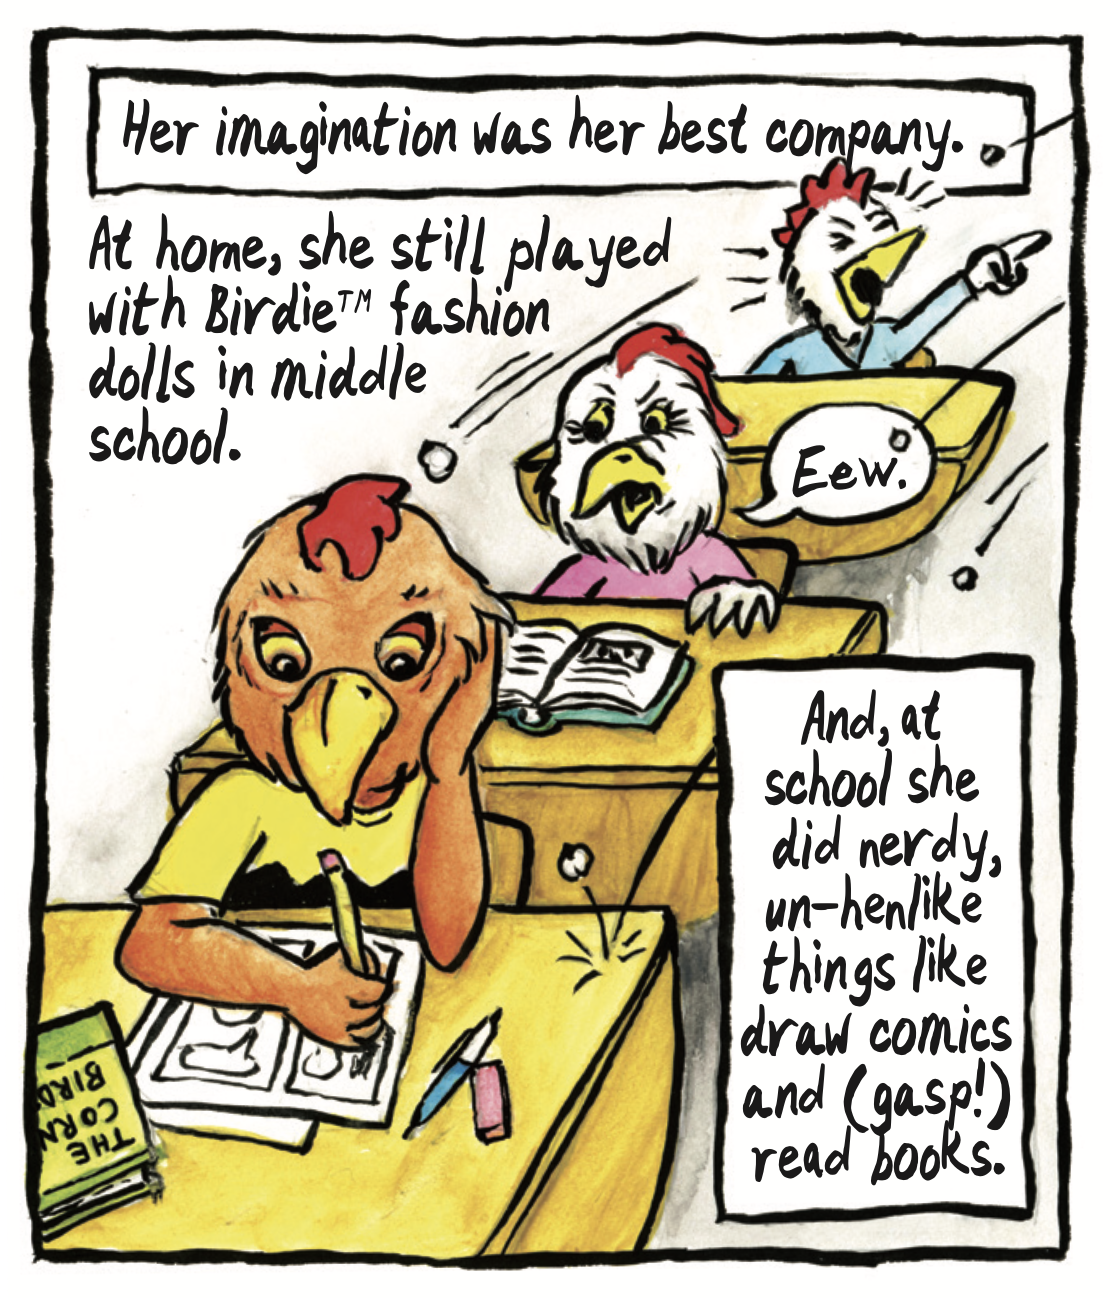 â€œHer imagination was her best company. At home, she still played with Birdieâ„¢ fashion dolls in middle school. And, at school she did nerdy, un-hen-like things like draw comics and (gasp!) read books.â€ The red chicken sits at her desk drawing comics, while white chickens throw balls of paper at her and one says, â€œEew.â€